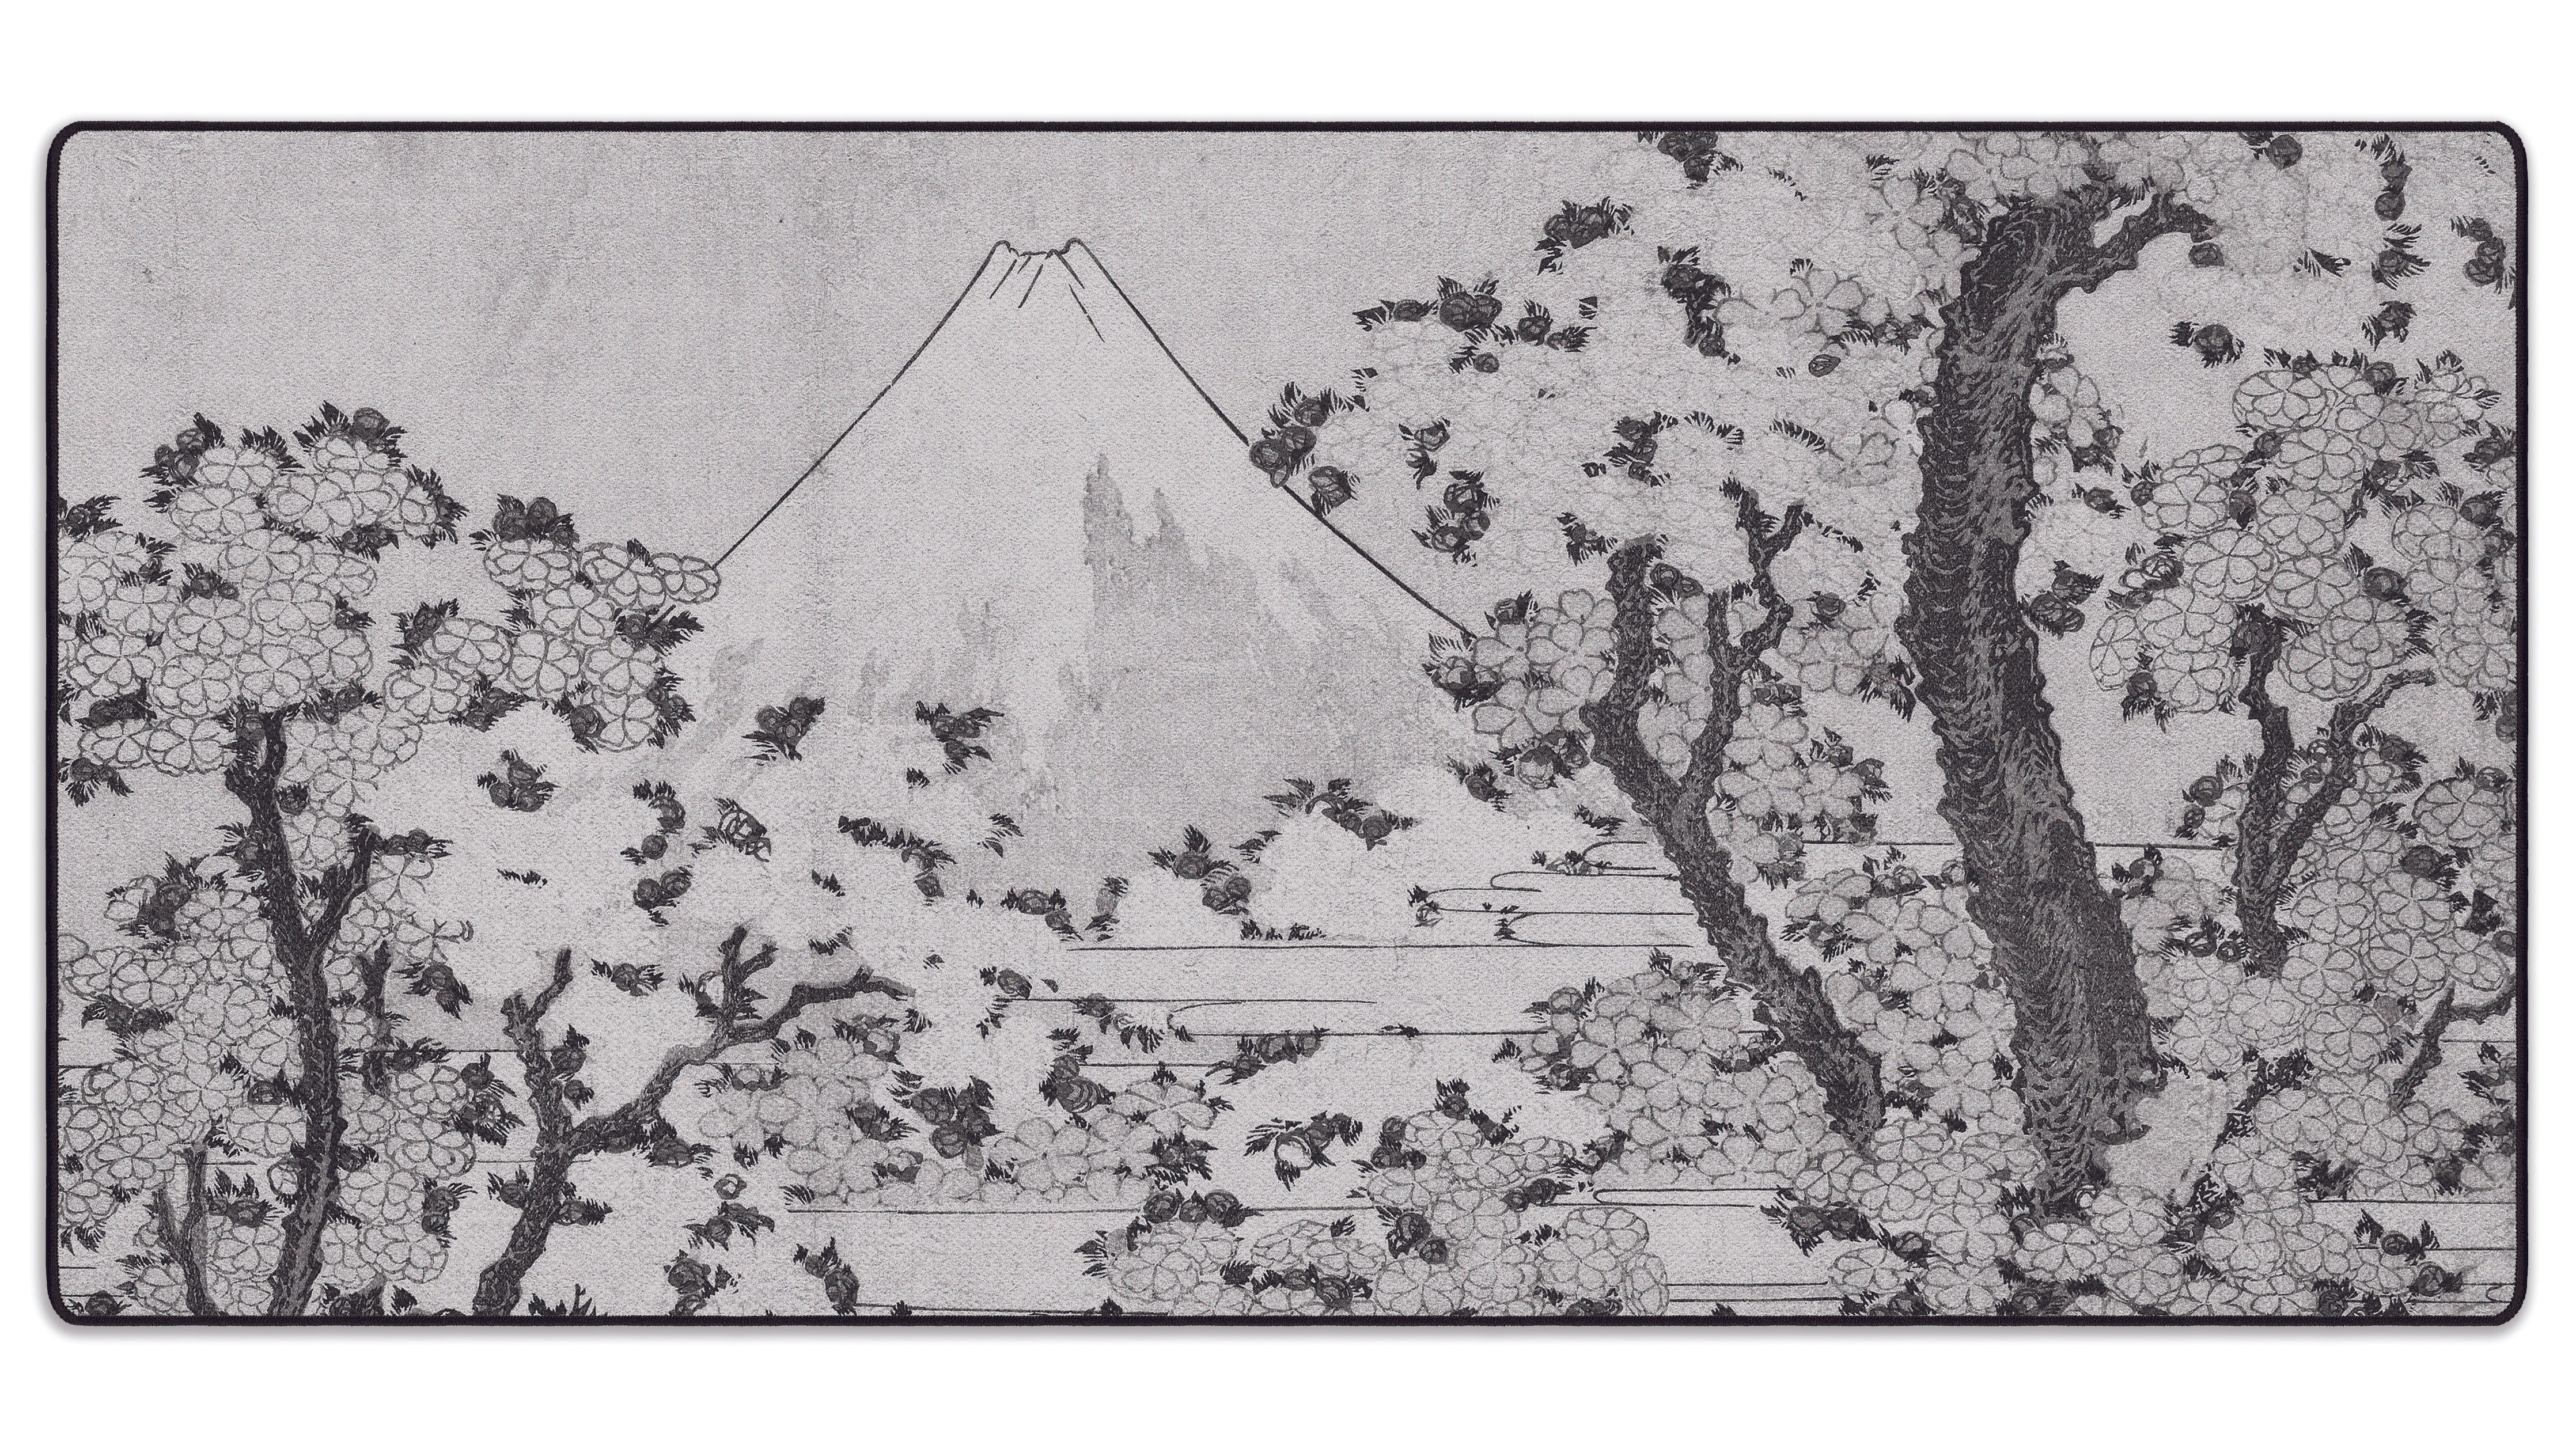 Mount Fuji with Cherry Trees in Bloom - The Mousepad Company